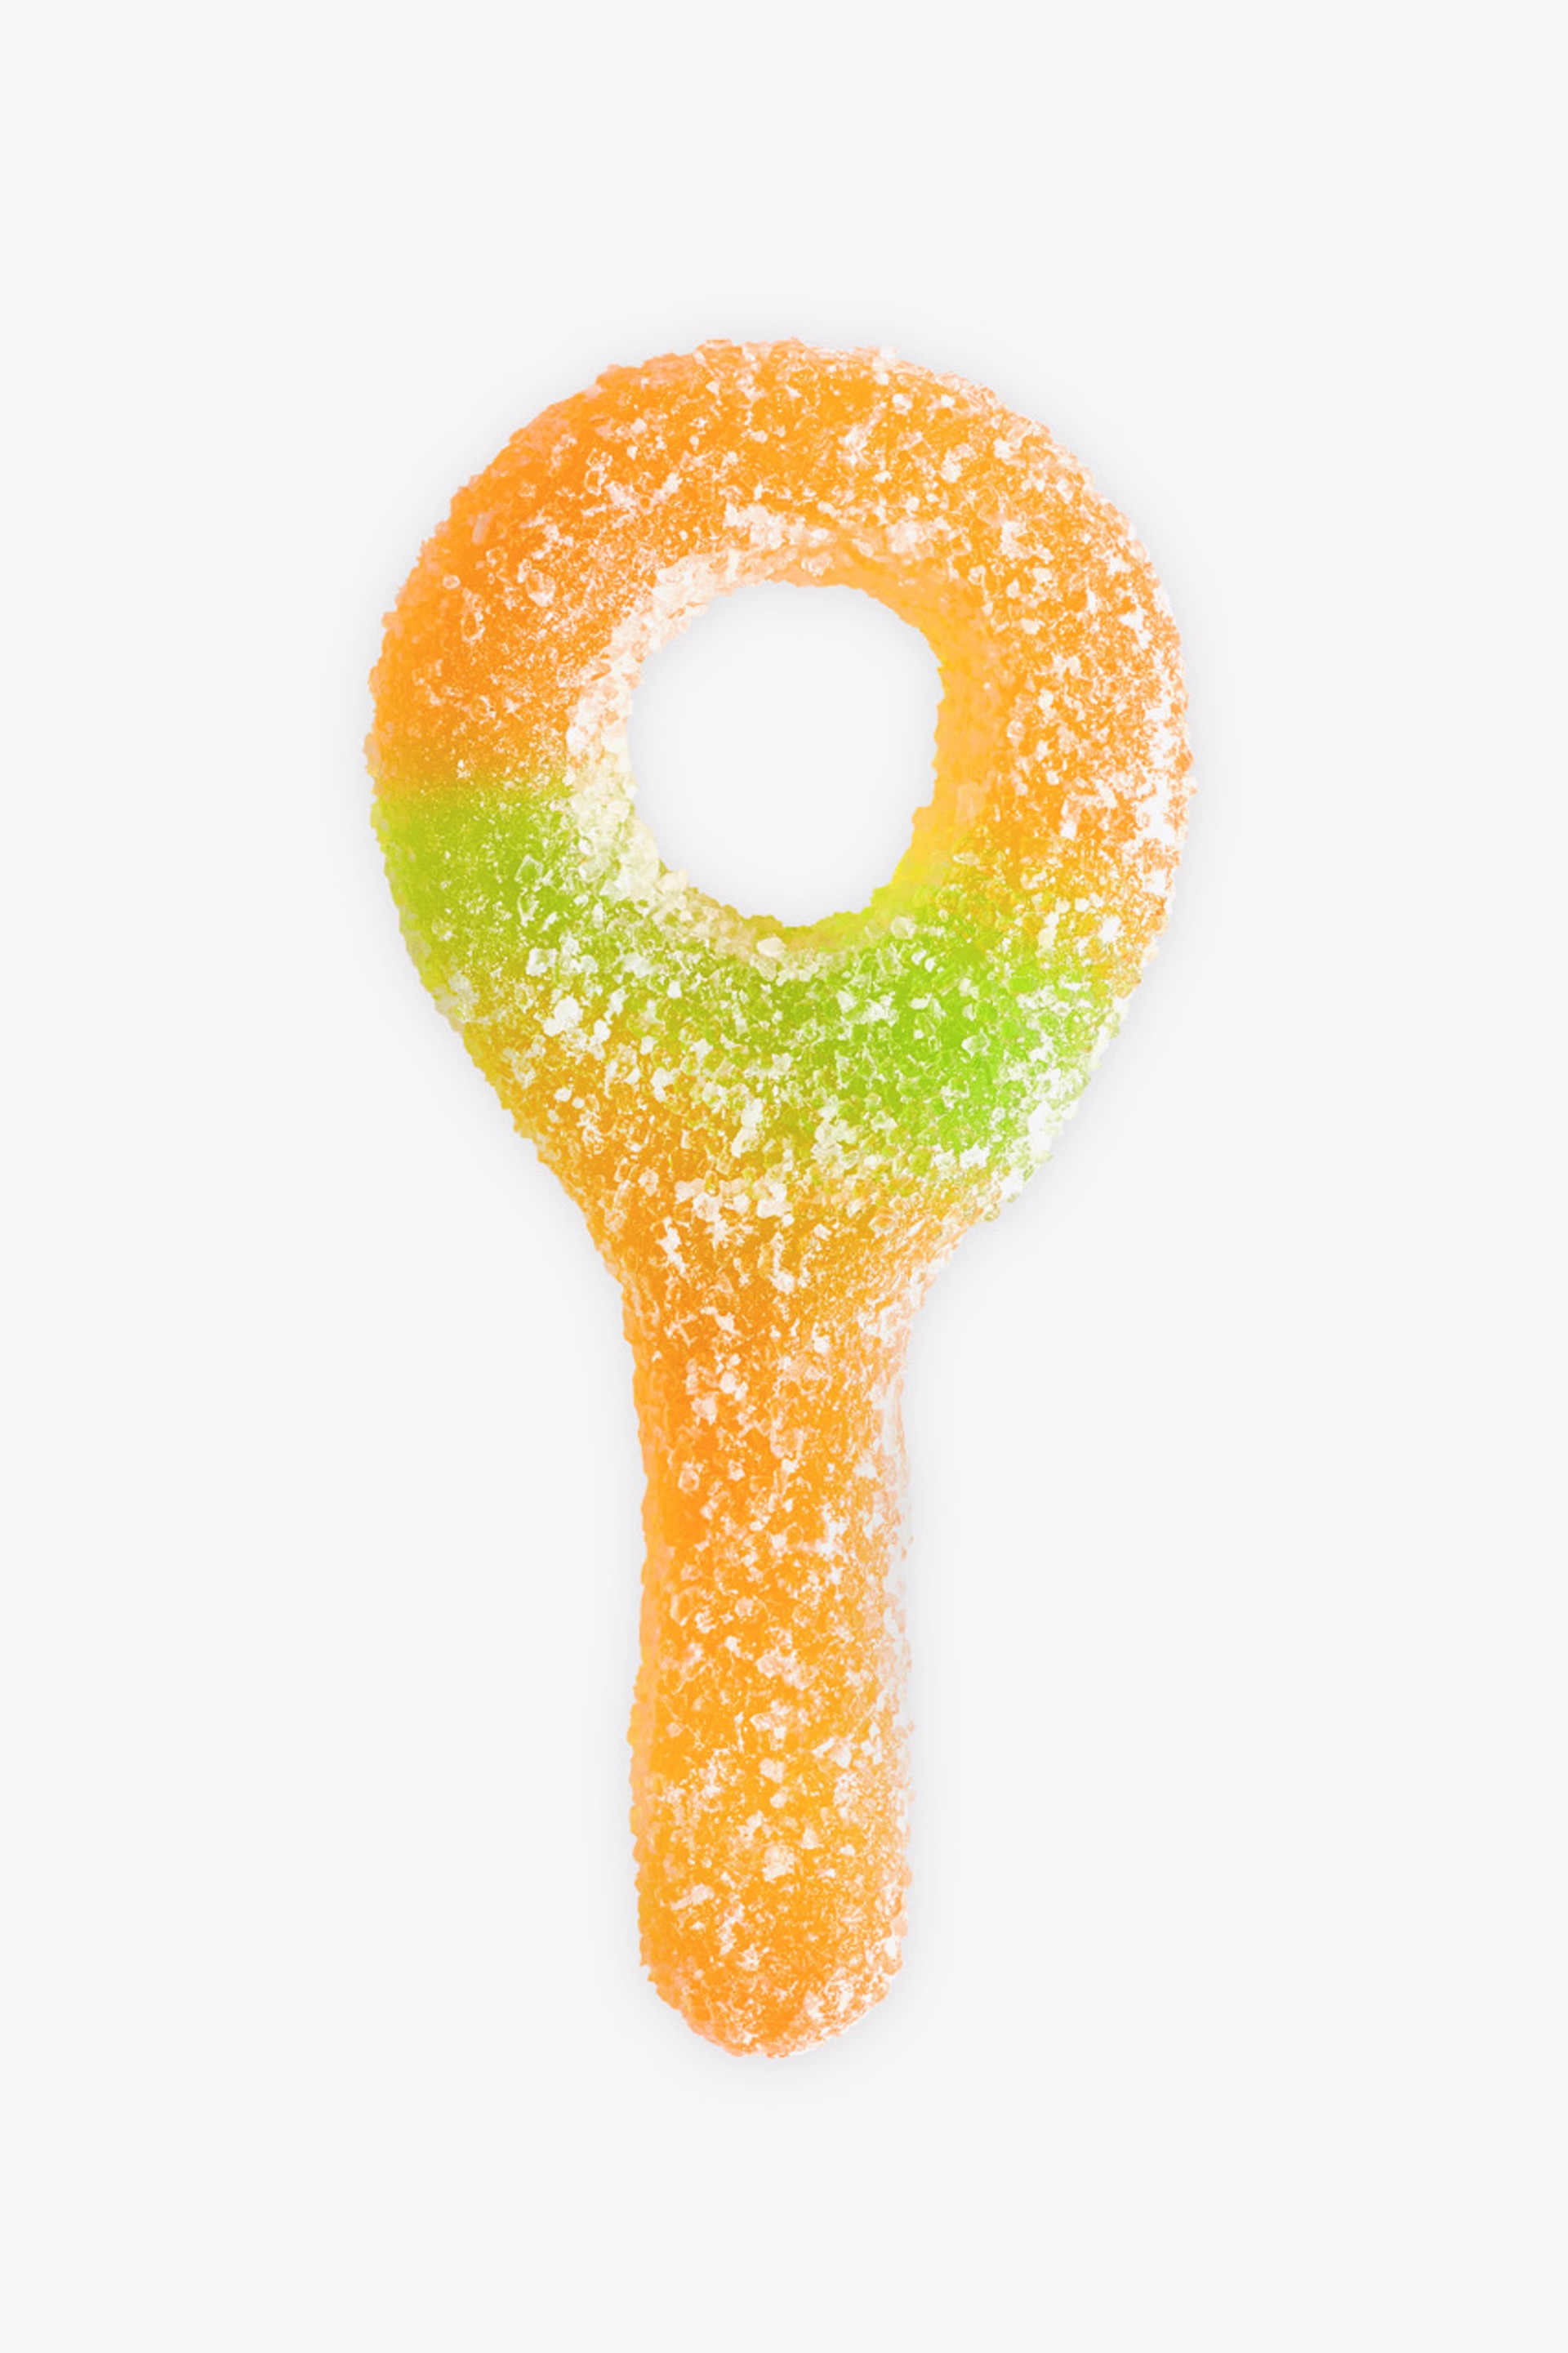 Sour Key - Yelllow / Green by Peter Andrew Lusztyk / Refined Sugar